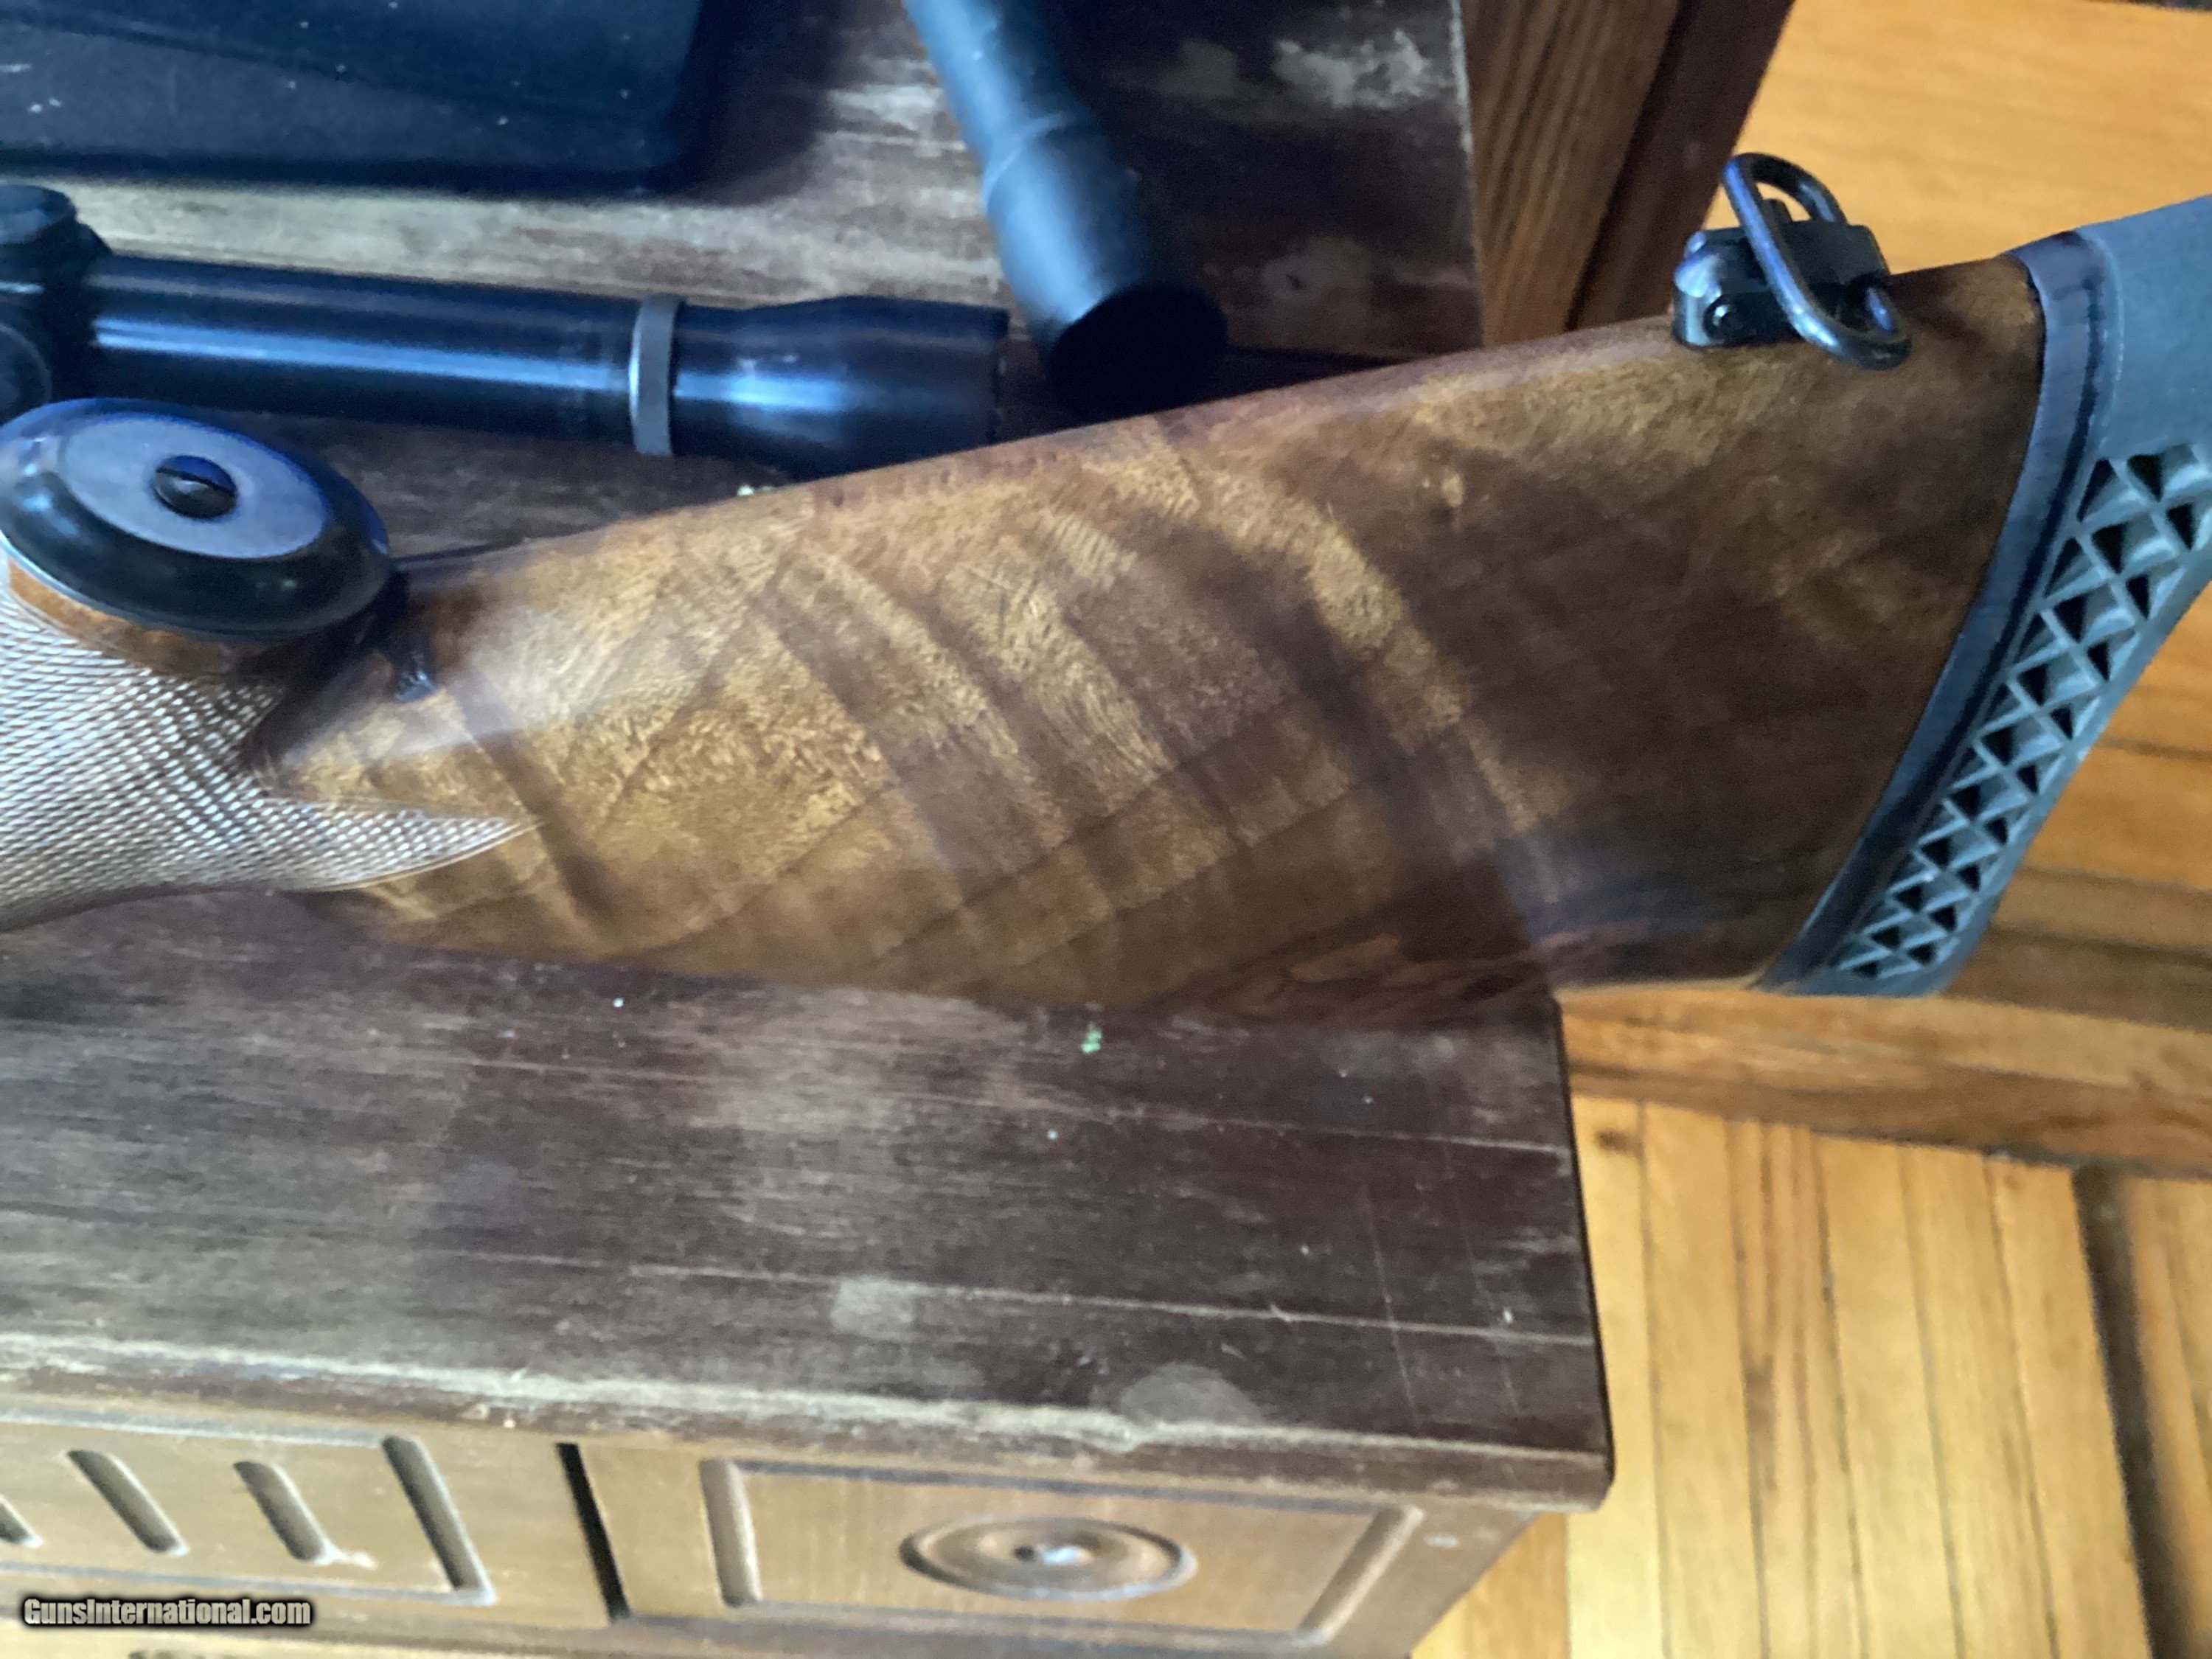 Fancy-walnut-98-Mauser-stock-large-ring-I-believe-this-is-one-of-the-HandR-ultra-rifle-stocks_...jpg